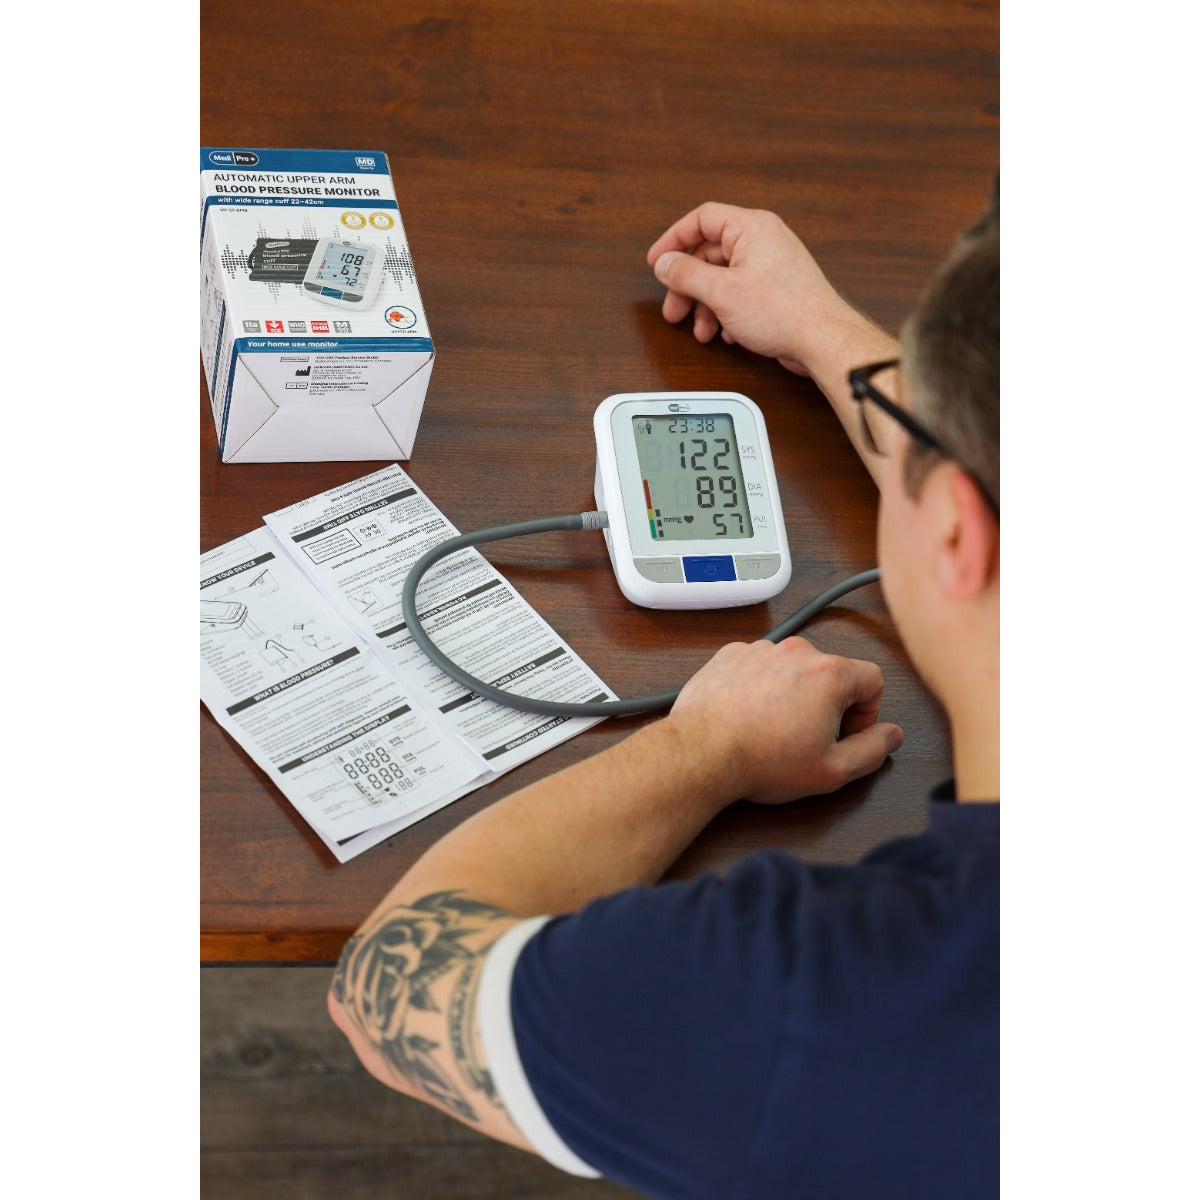 Blood Pressure Monitor - Upper Arm Device For Home Use